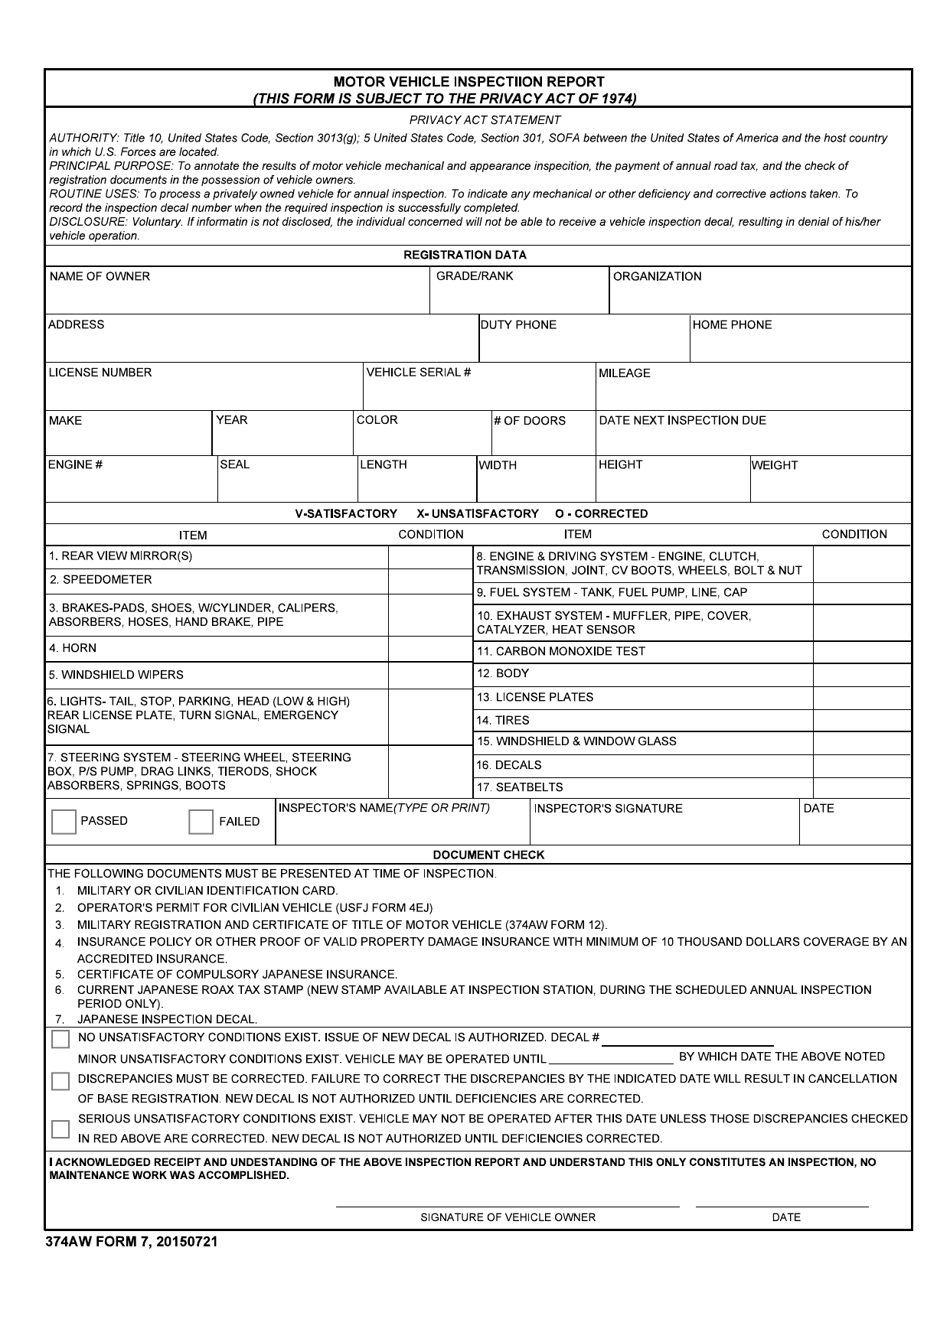 374 AW Form 7 Motor Vehicle Inspection Report, Page 1